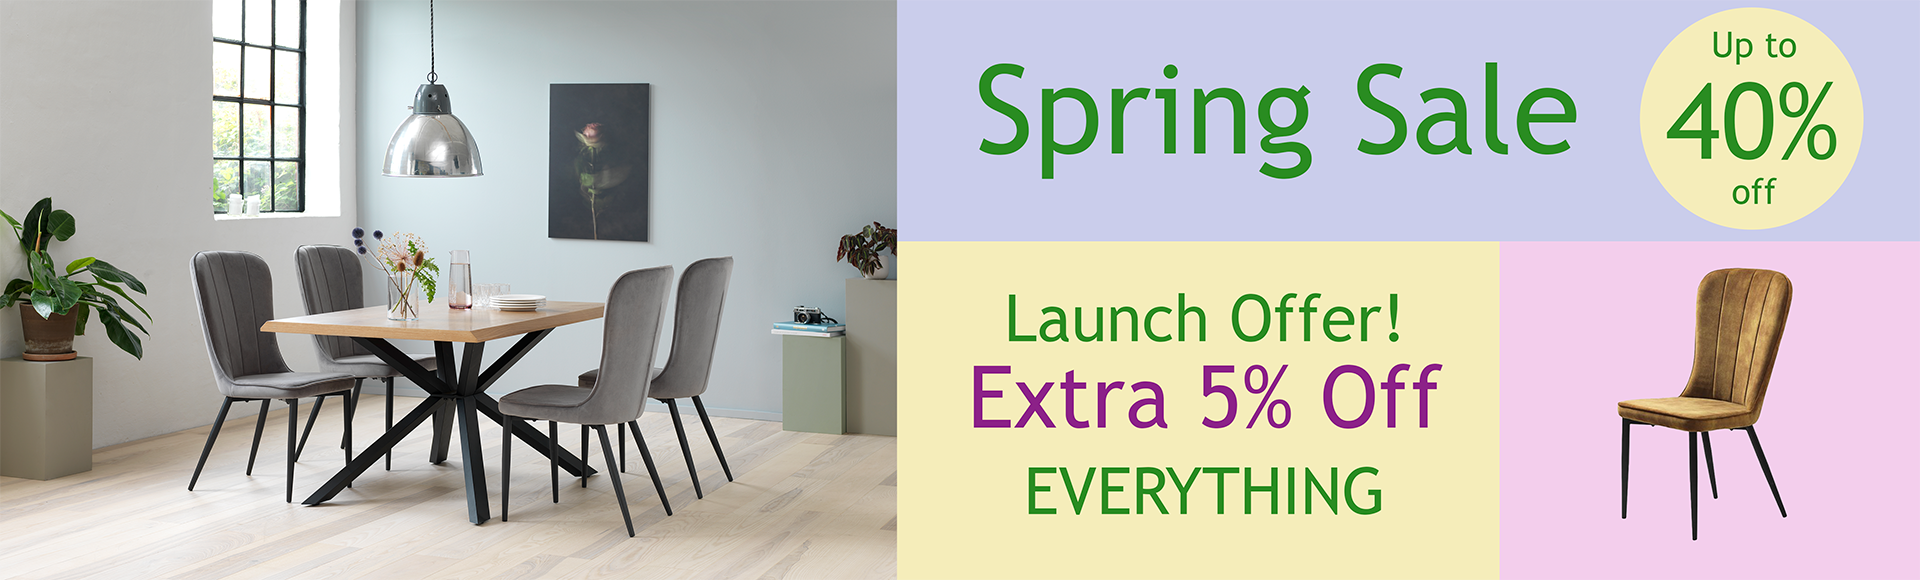 Spring Sale - Extra 5% Off Everything